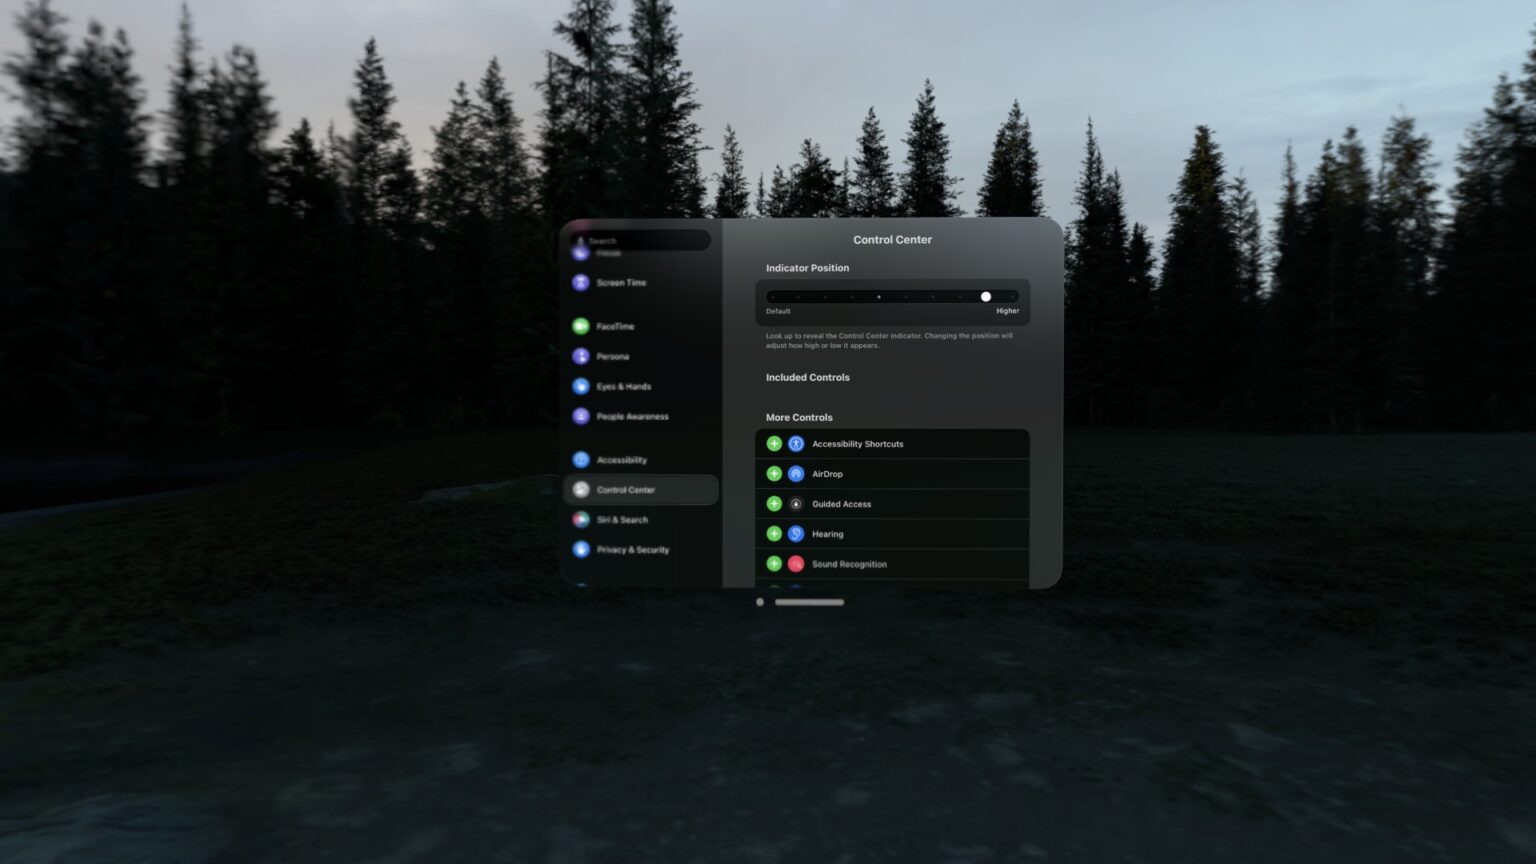 Vision Pro Control Center settings floating in a forest